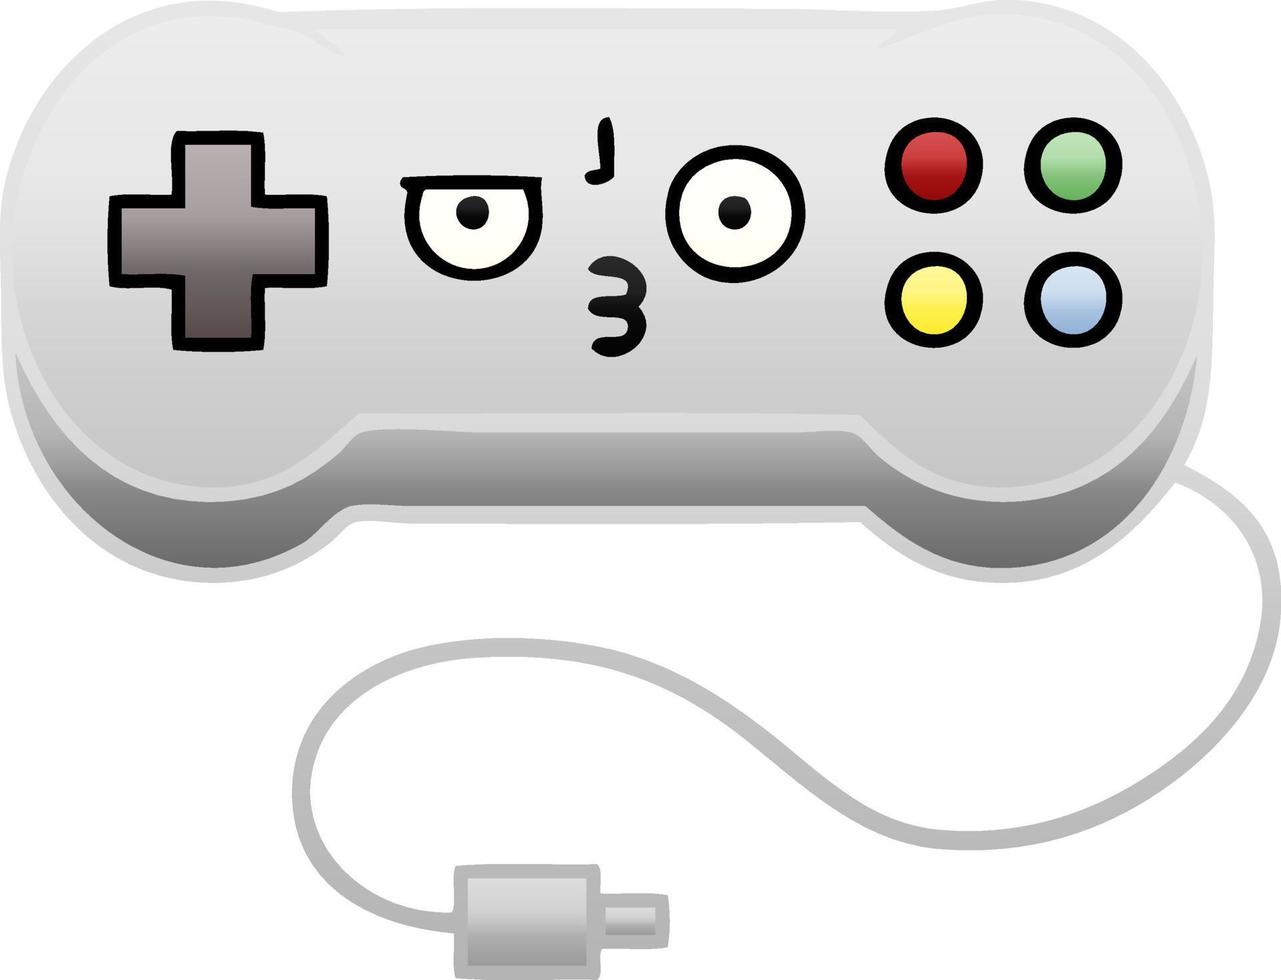 gradient shaded cartoon game controller vector